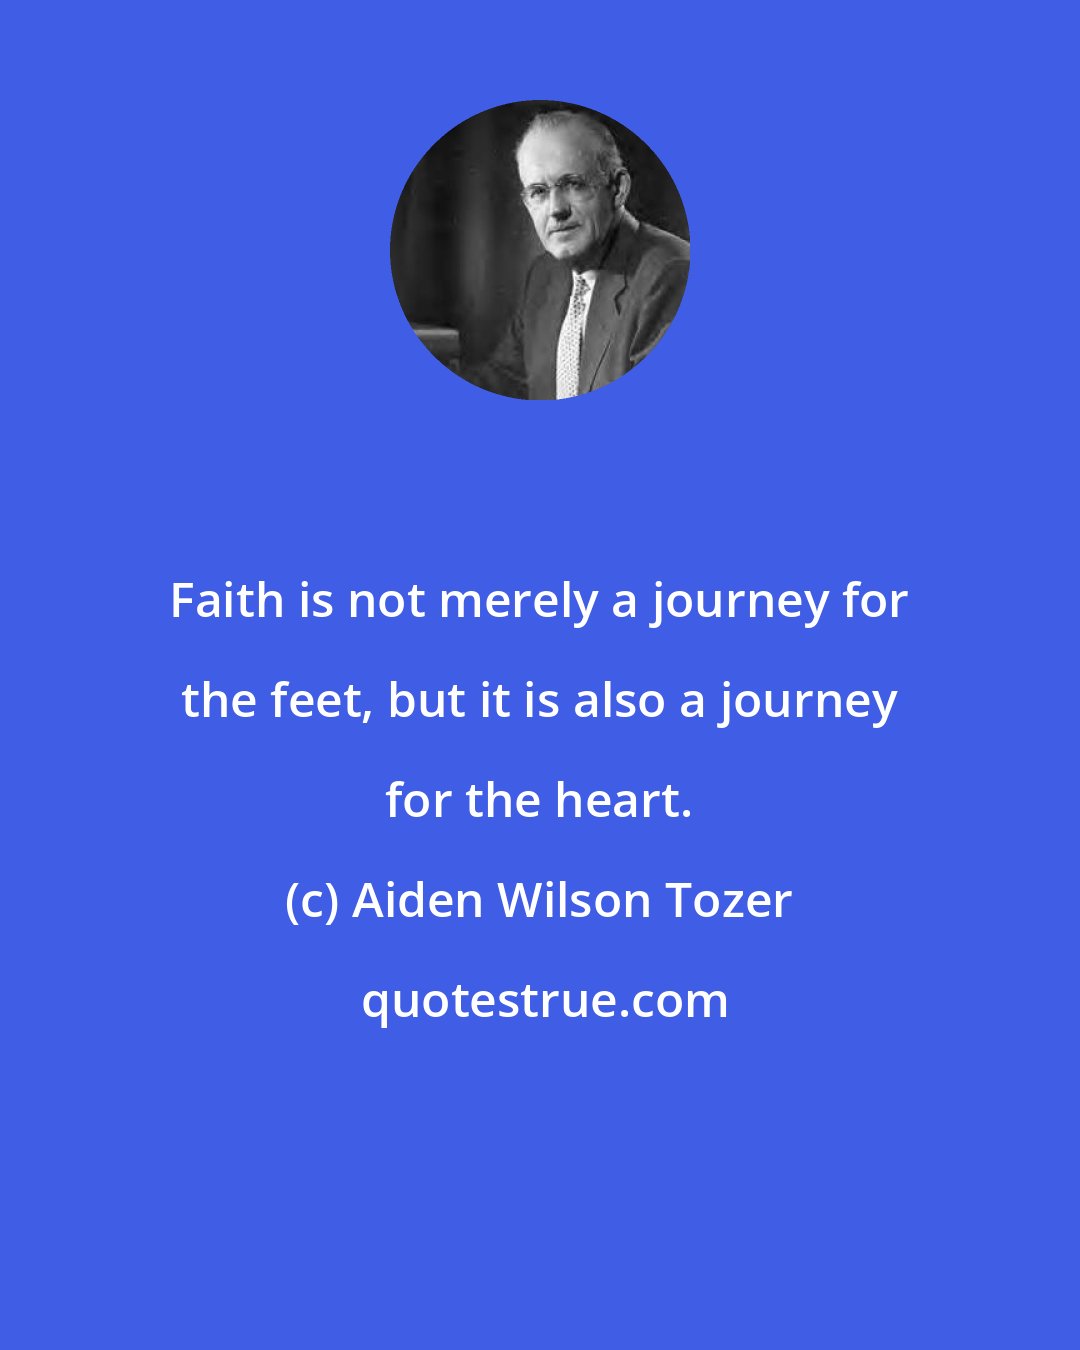 Aiden Wilson Tozer: Faith is not merely a journey for the feet, but it is also a journey for the heart.